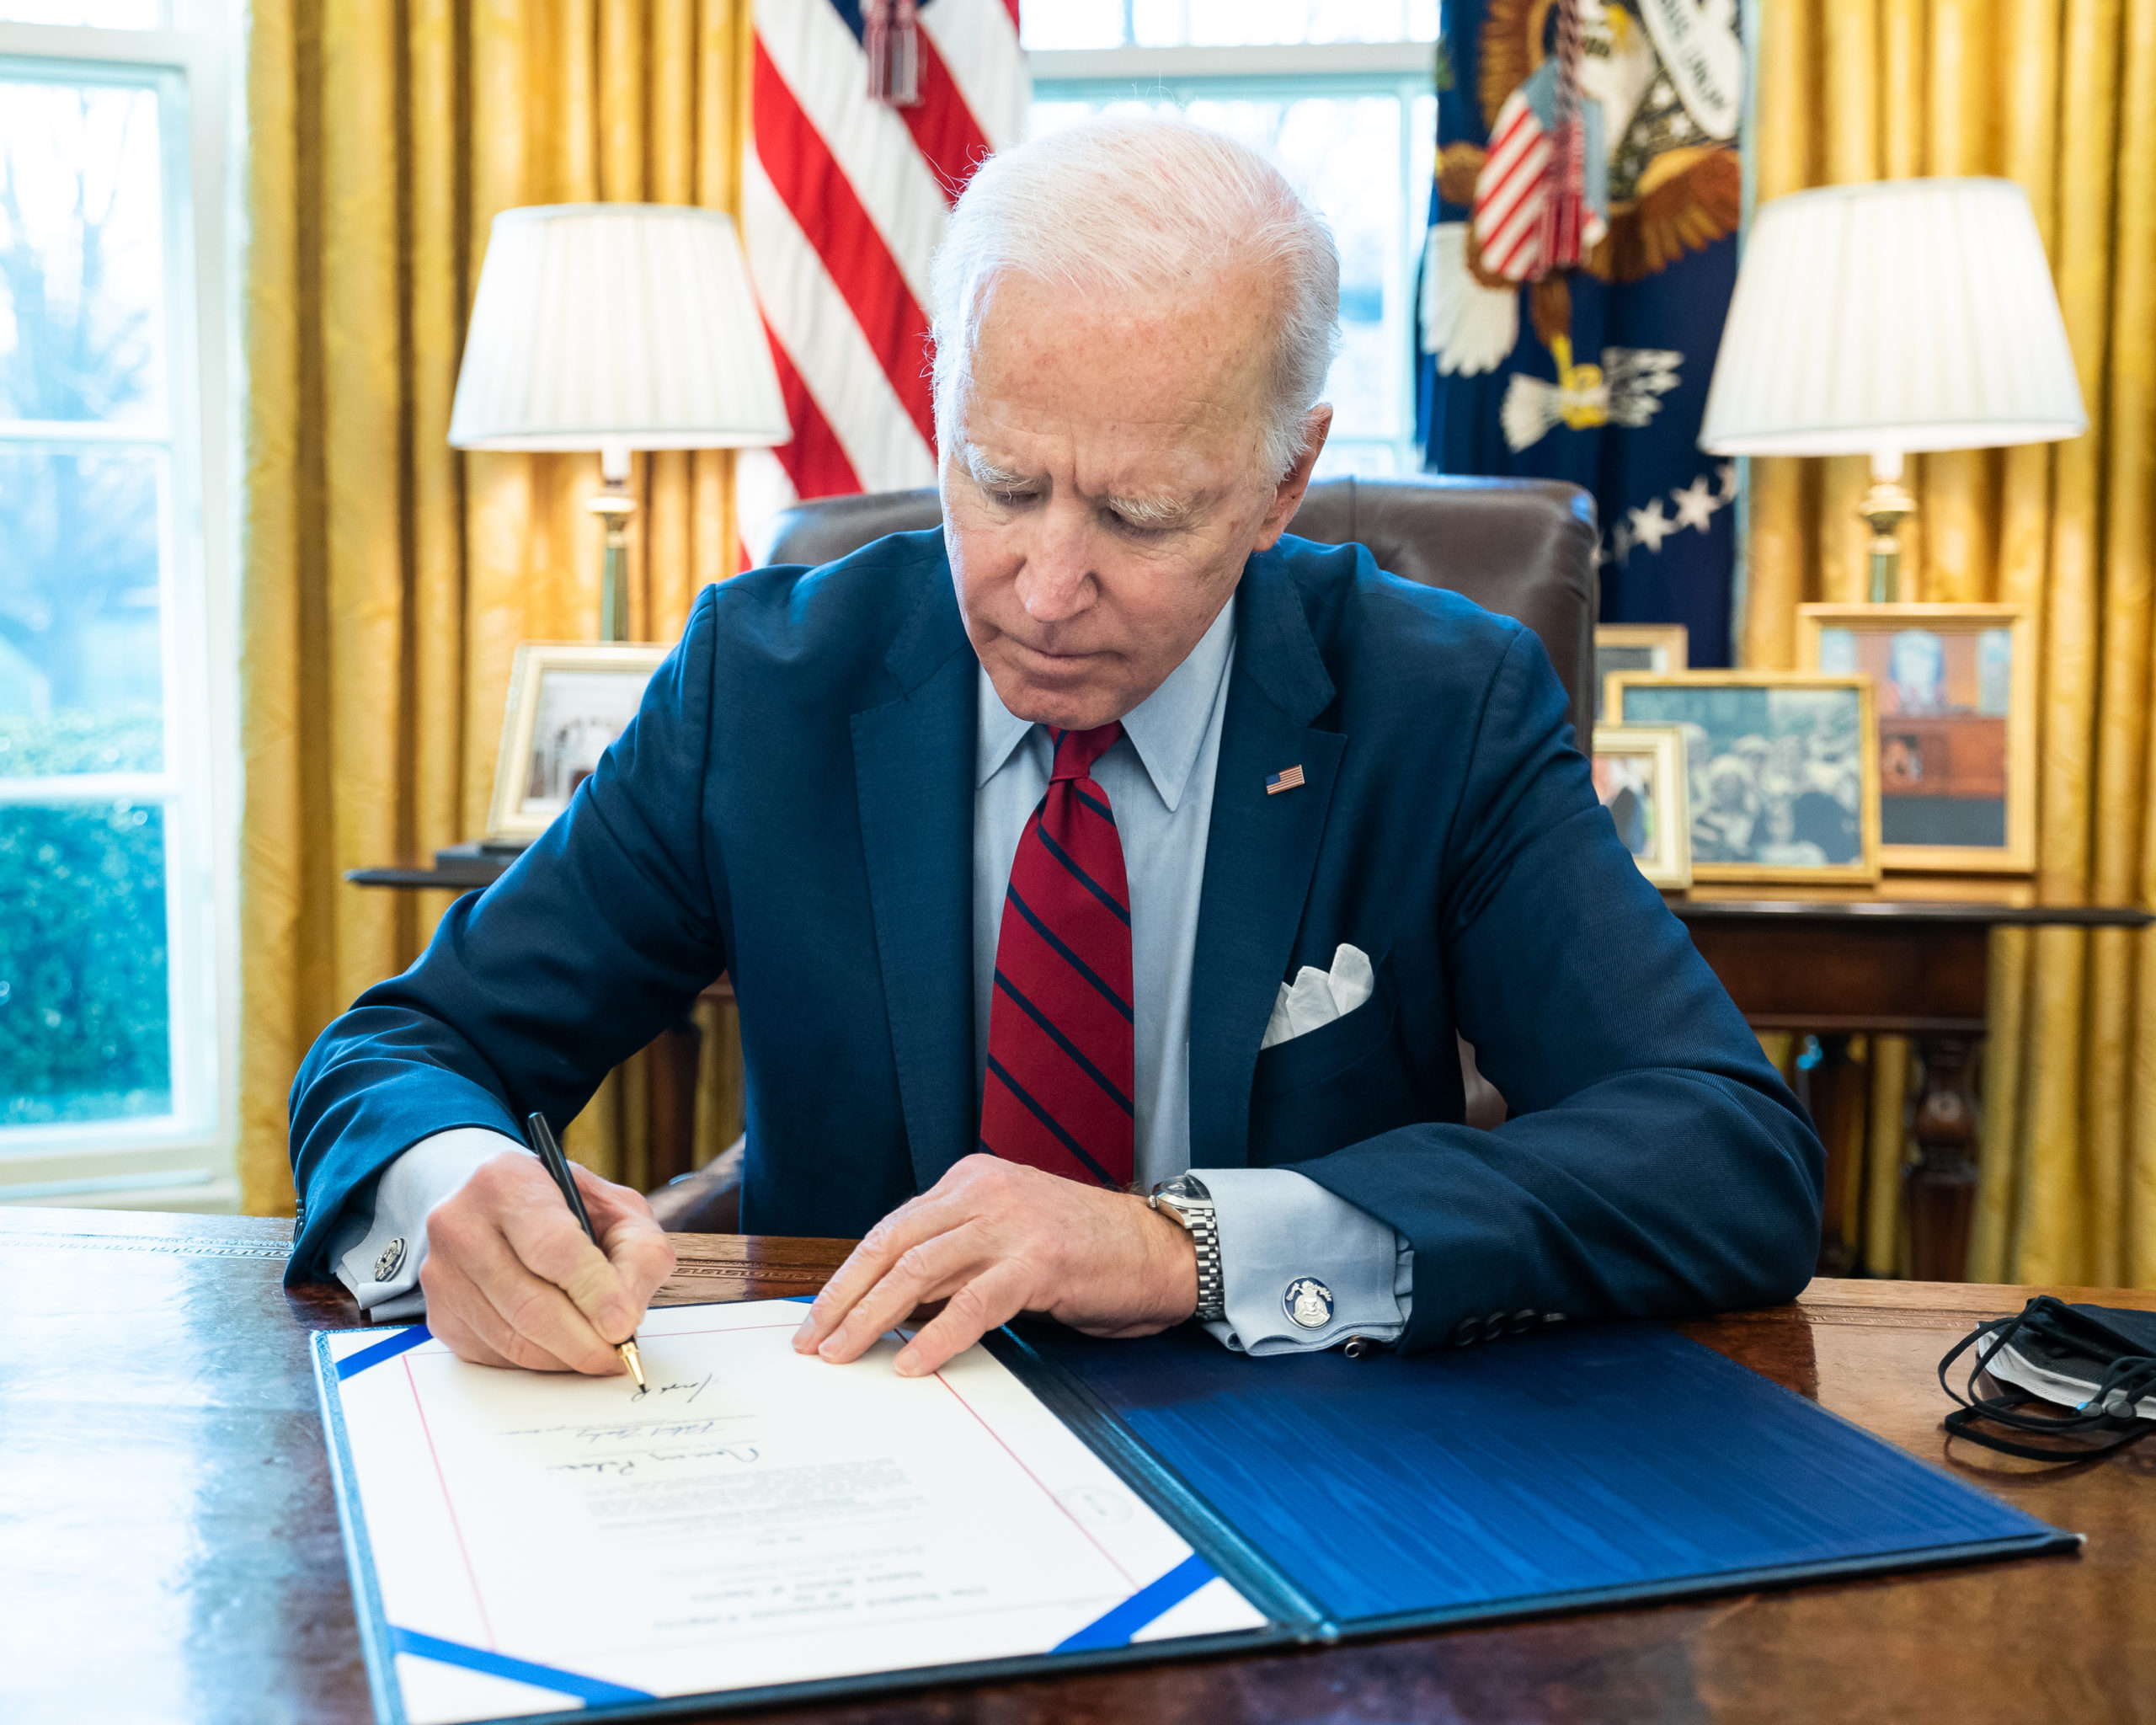 Biden Administration Promotes LGBTQI Rights in Foreign Policy, Threatening International Religious Freedom